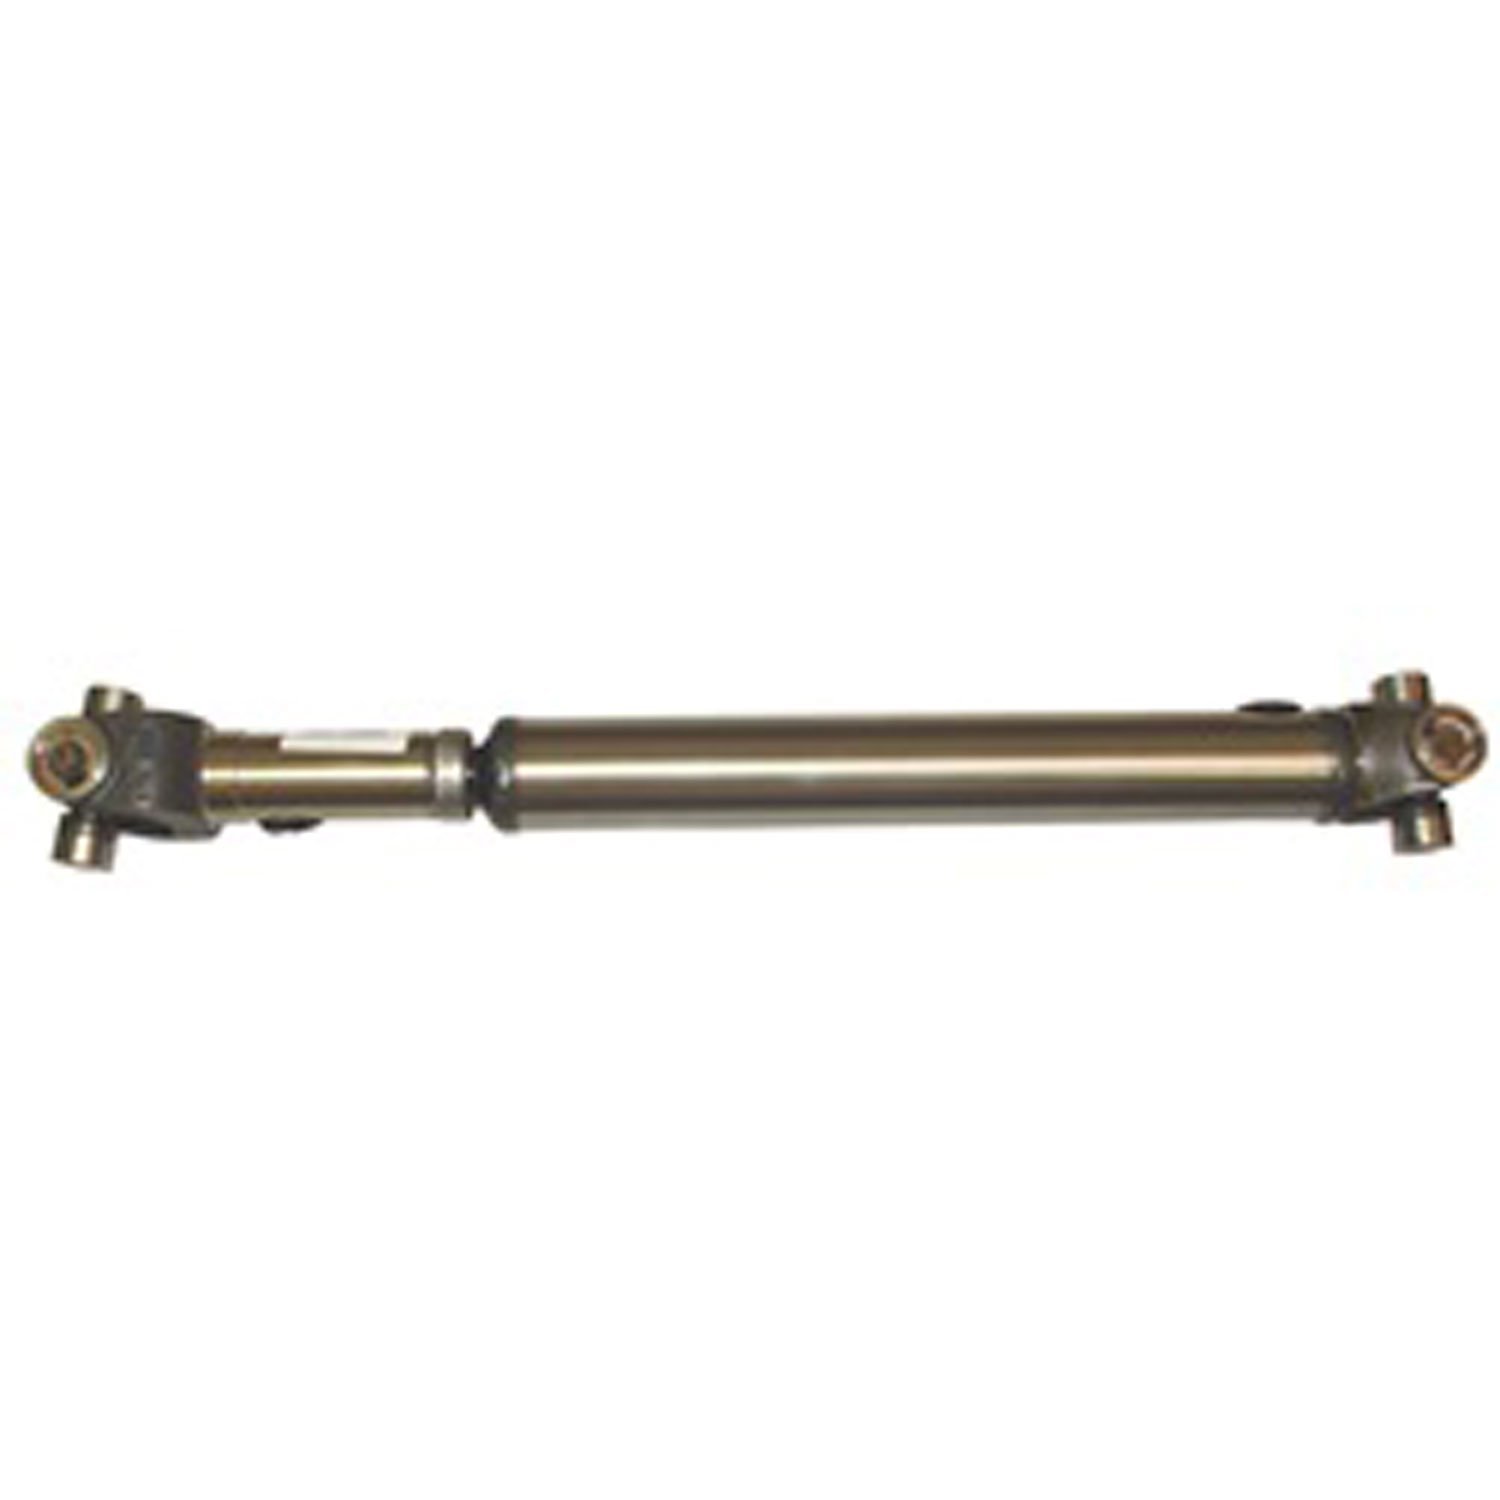 Stock replacement rear driveshaft from Omix-ADA, Fits 1980 Jeep CJ7 with a SR4 or T170 manual transmission.